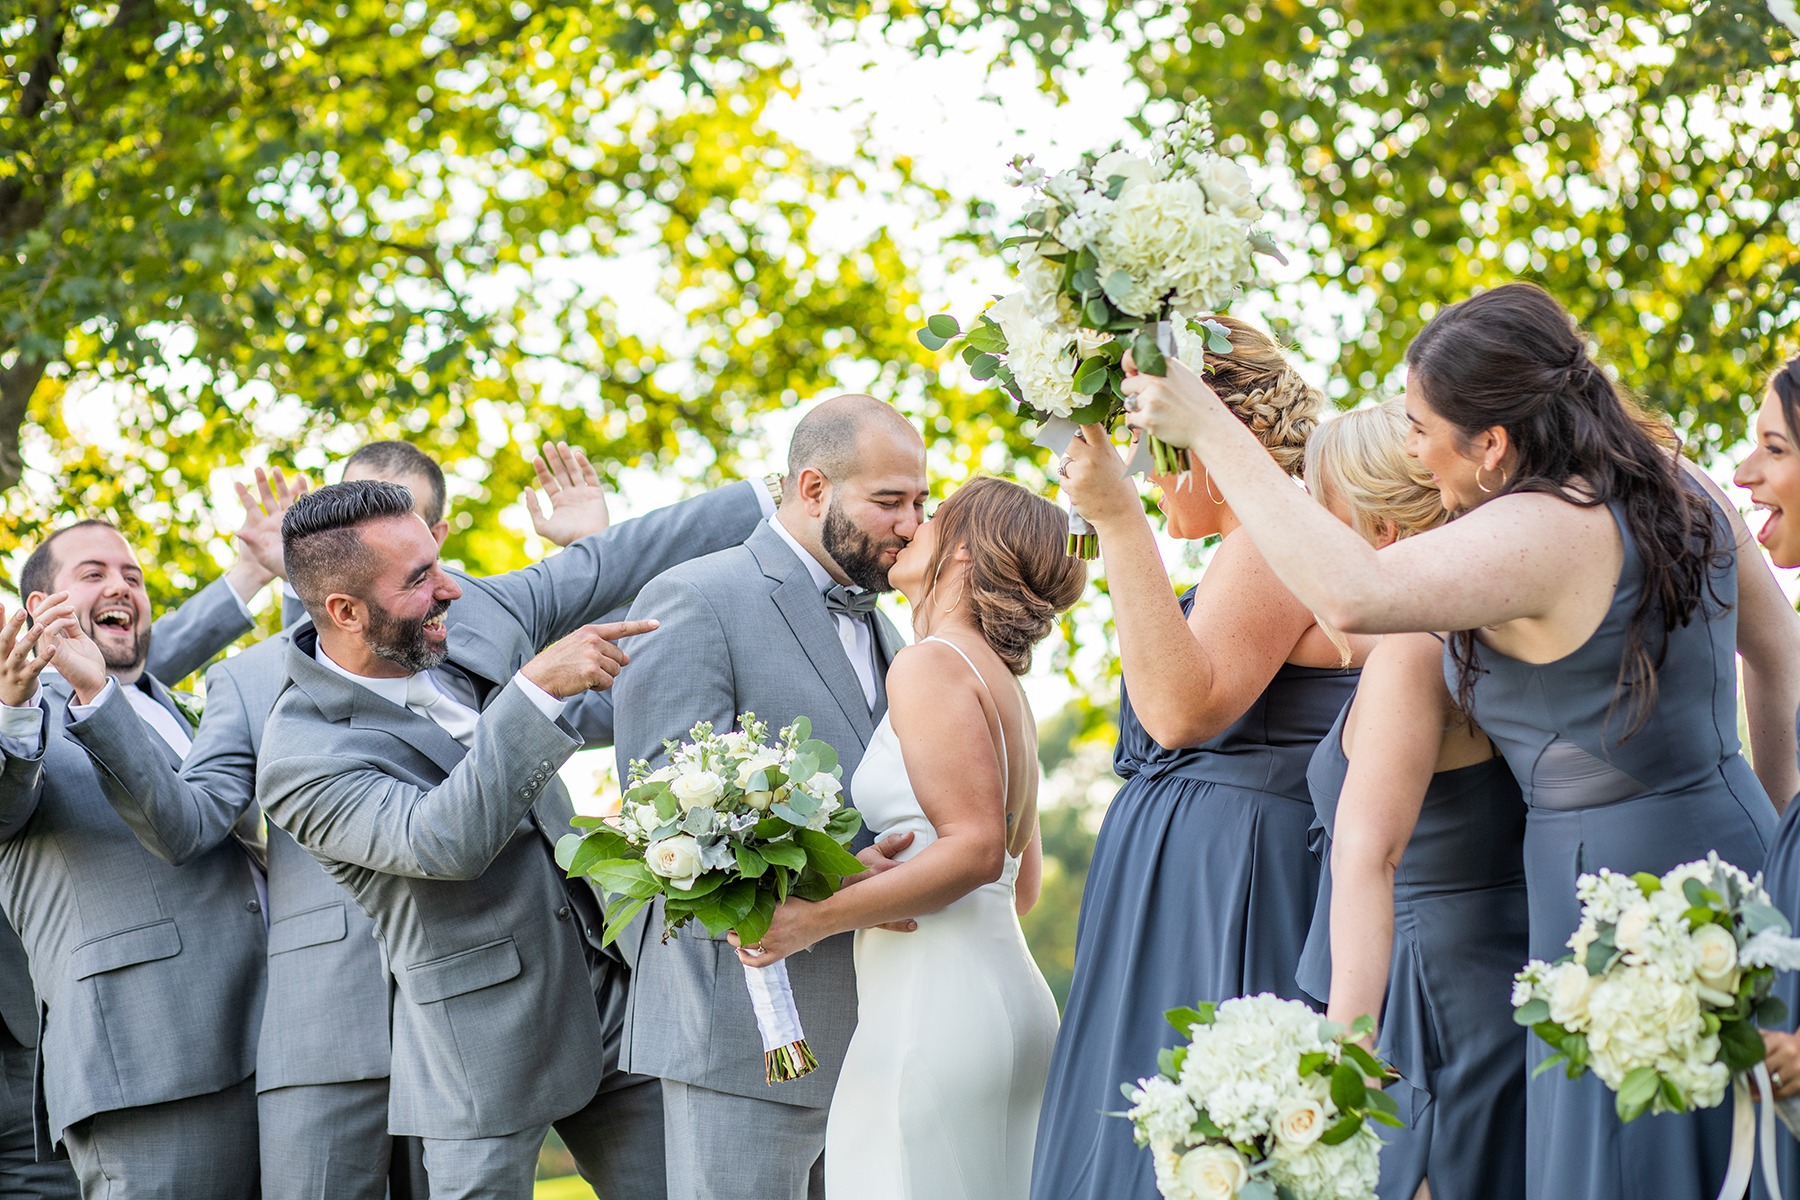 The Wedding Photography - Catching Your Precious Moments